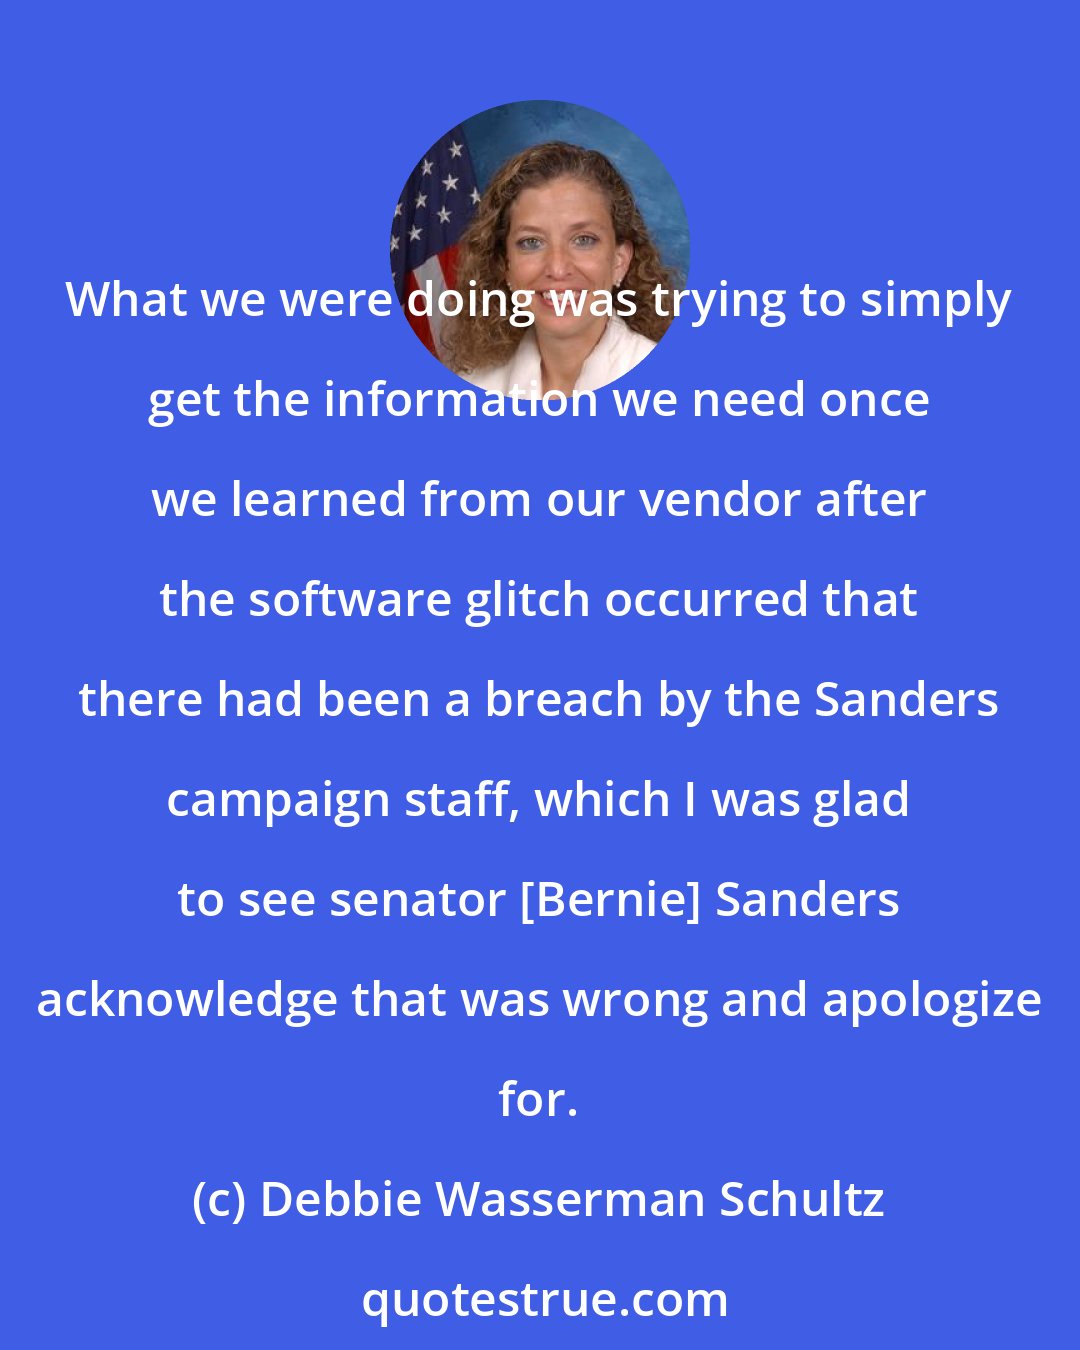 Debbie Wasserman Schultz: What we were doing was trying to simply get the information we need once we learned from our vendor after the software glitch occurred that there had been a breach by the Sanders campaign staff, which I was glad to see senator [Bernie] Sanders acknowledge that was wrong and apologize for.